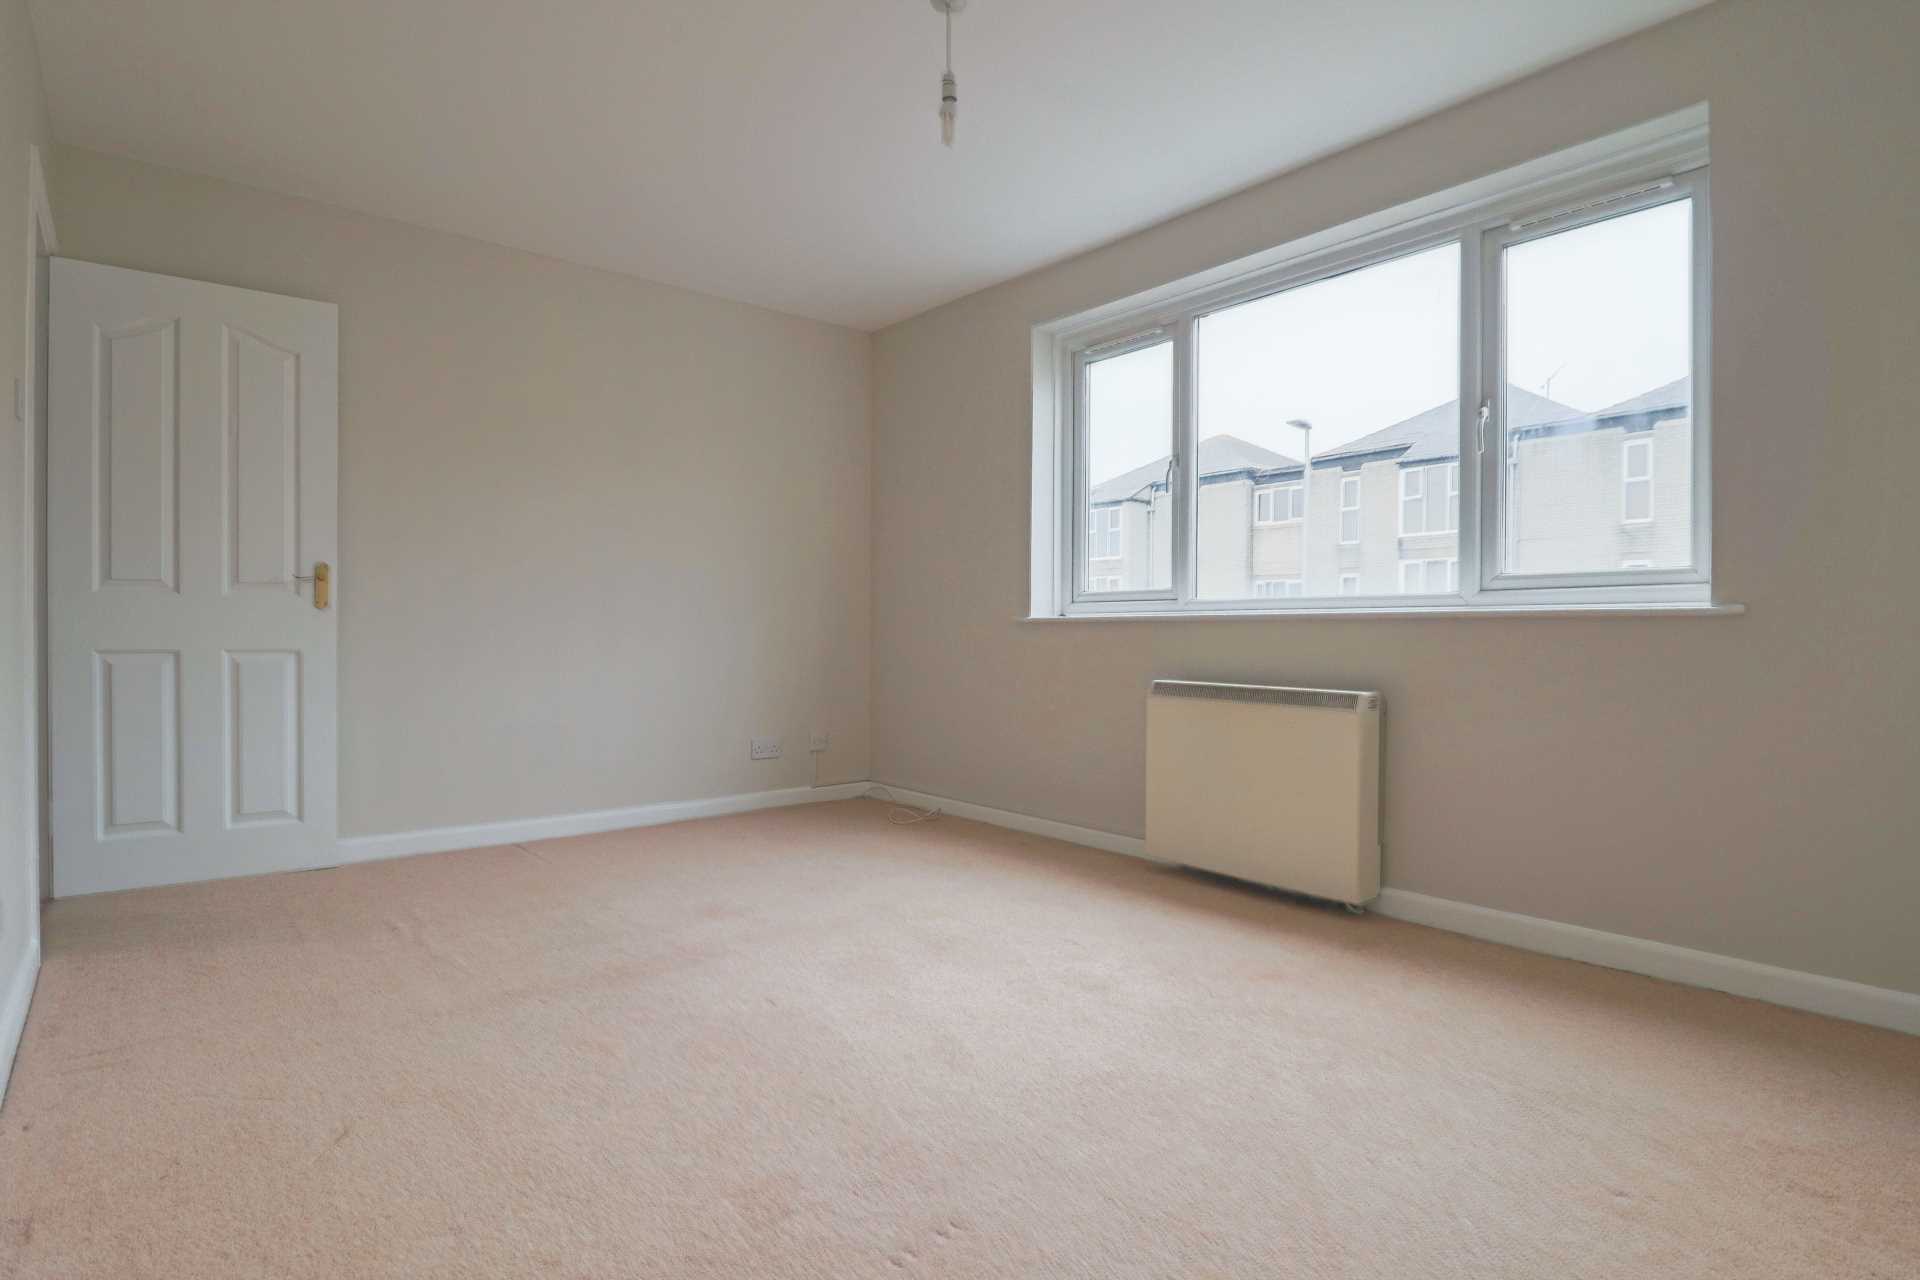 Moorland Road - Spacious Freehold Flat, Image 8